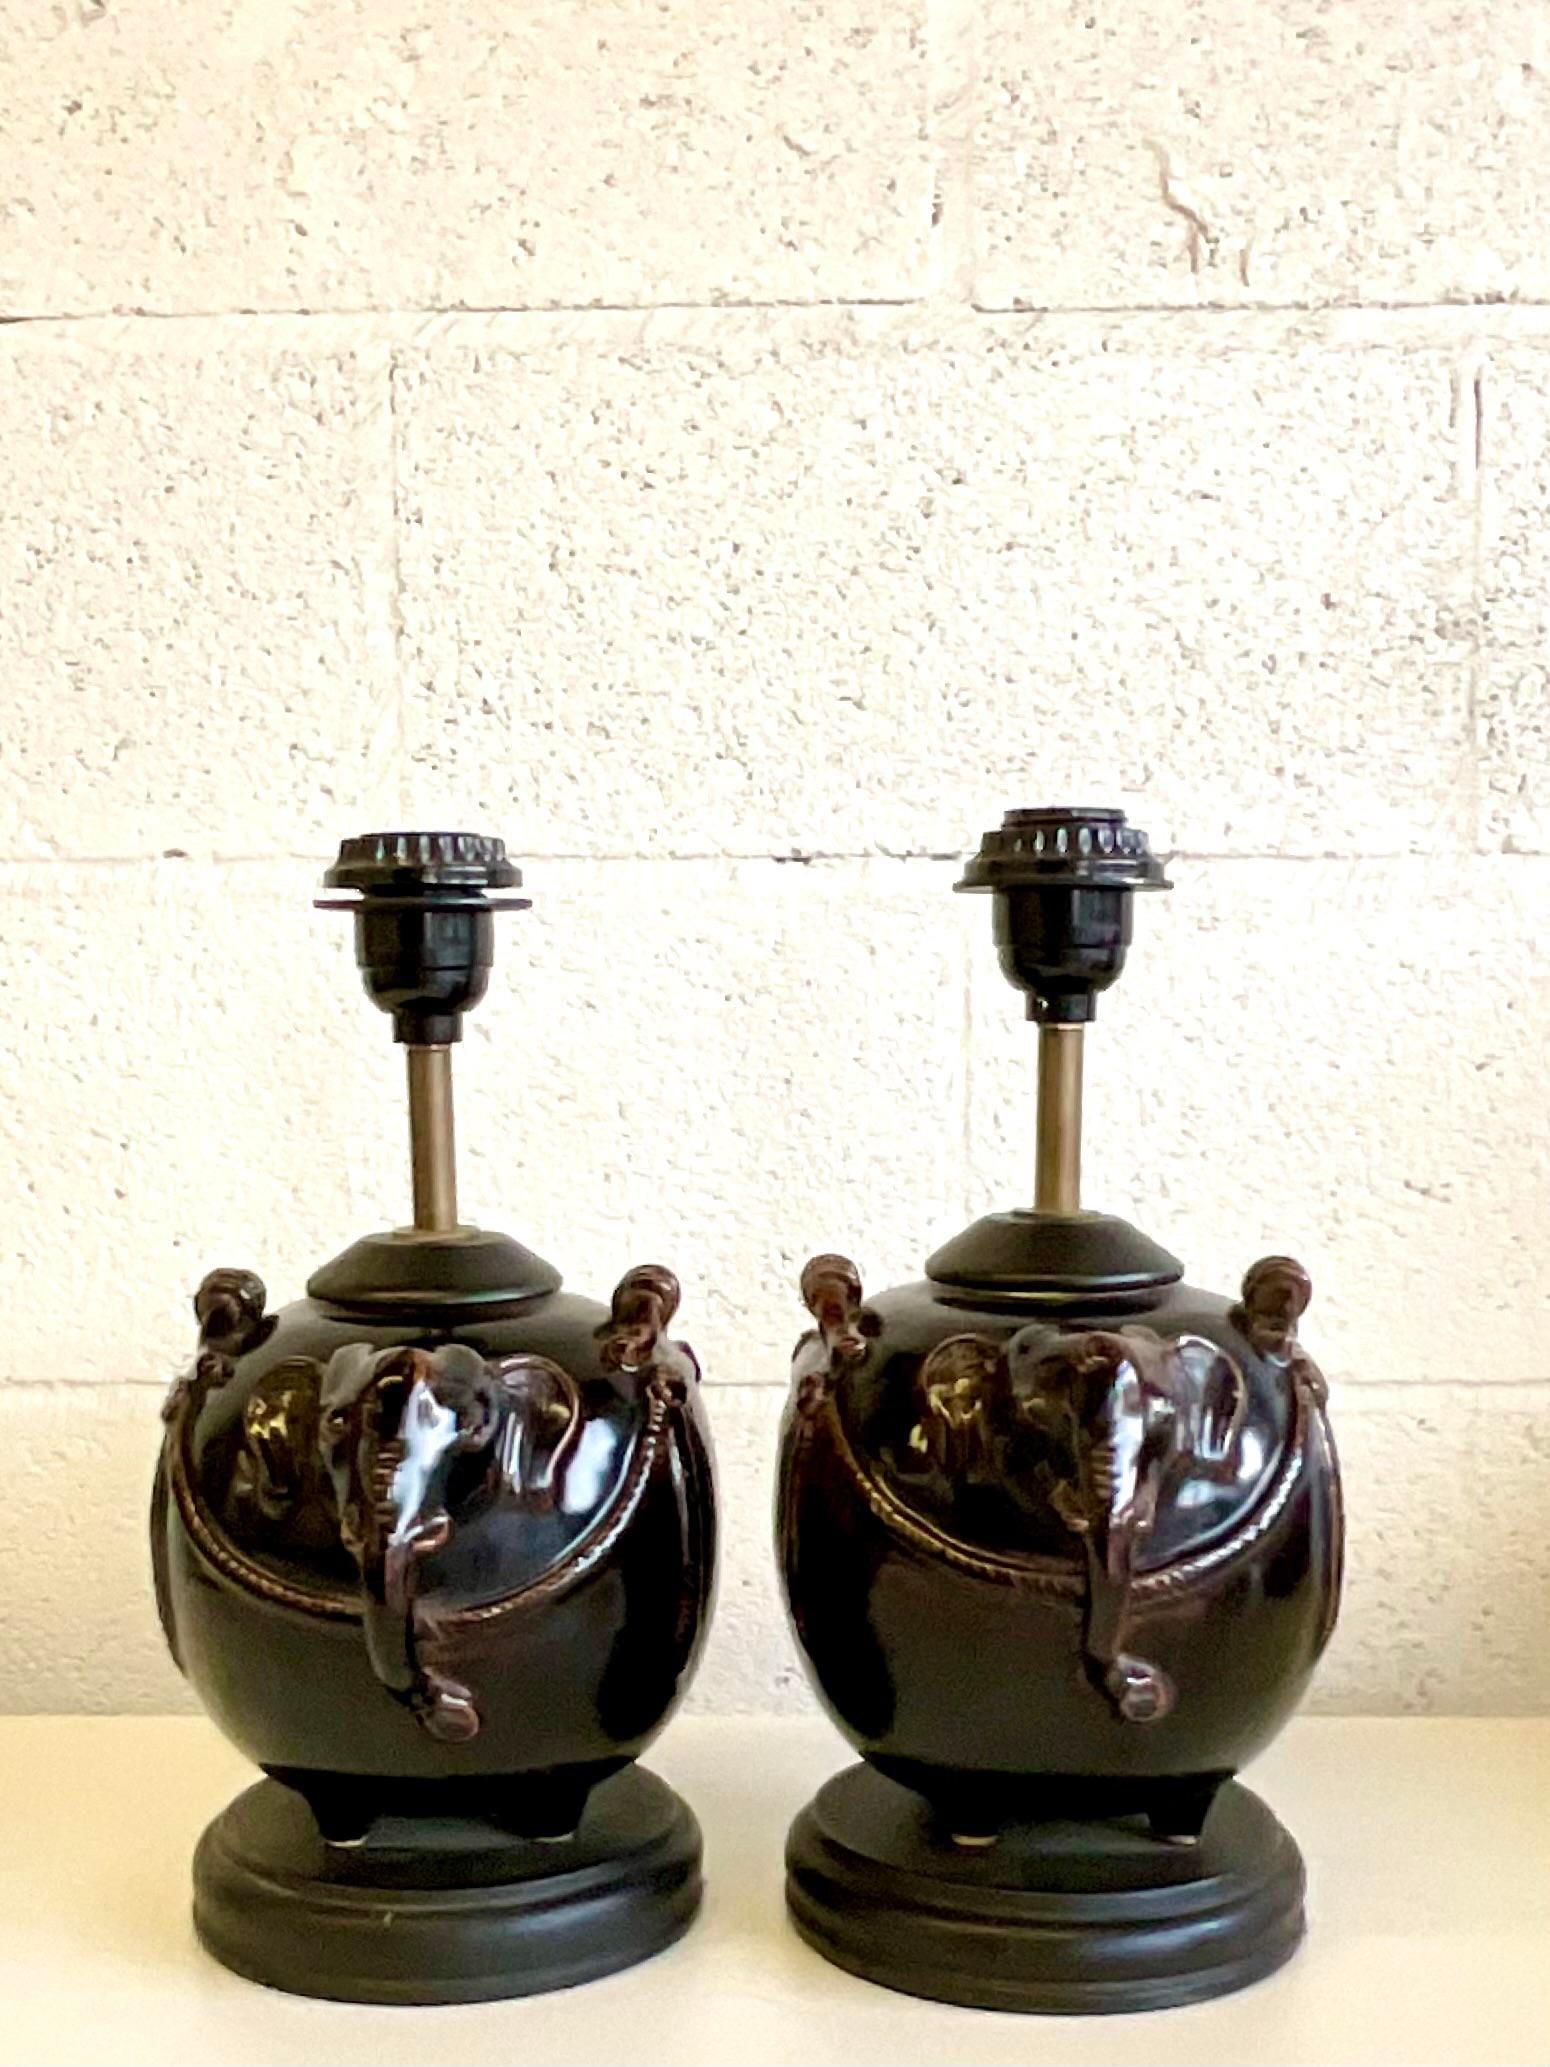 Vintage Glazed Ceramic Elephant Lamps - a Pair In Good Condition For Sale In west palm beach, FL